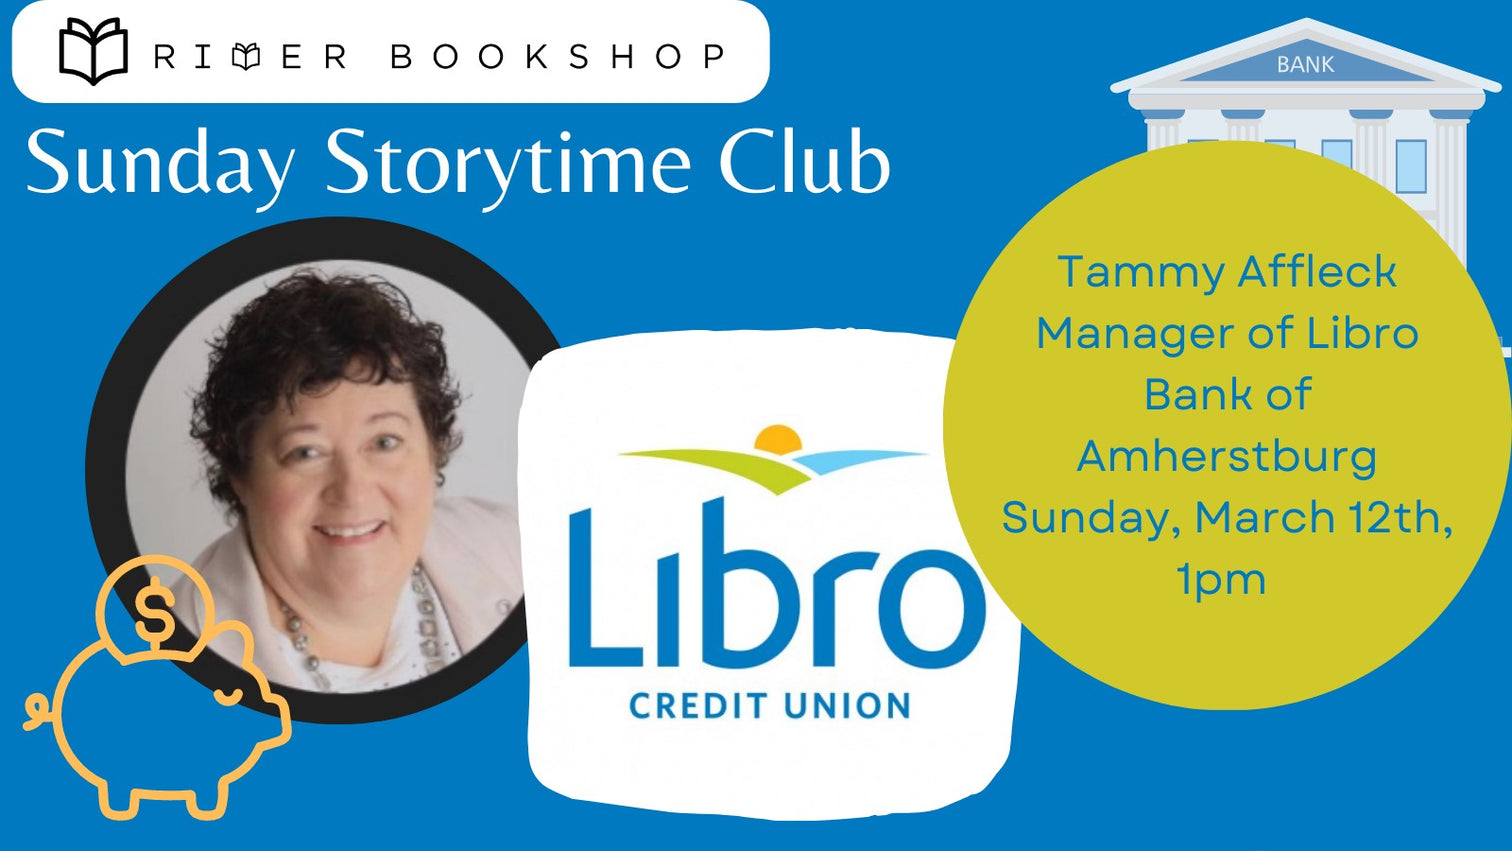 River Book Shop 's Sunday Storytime Club